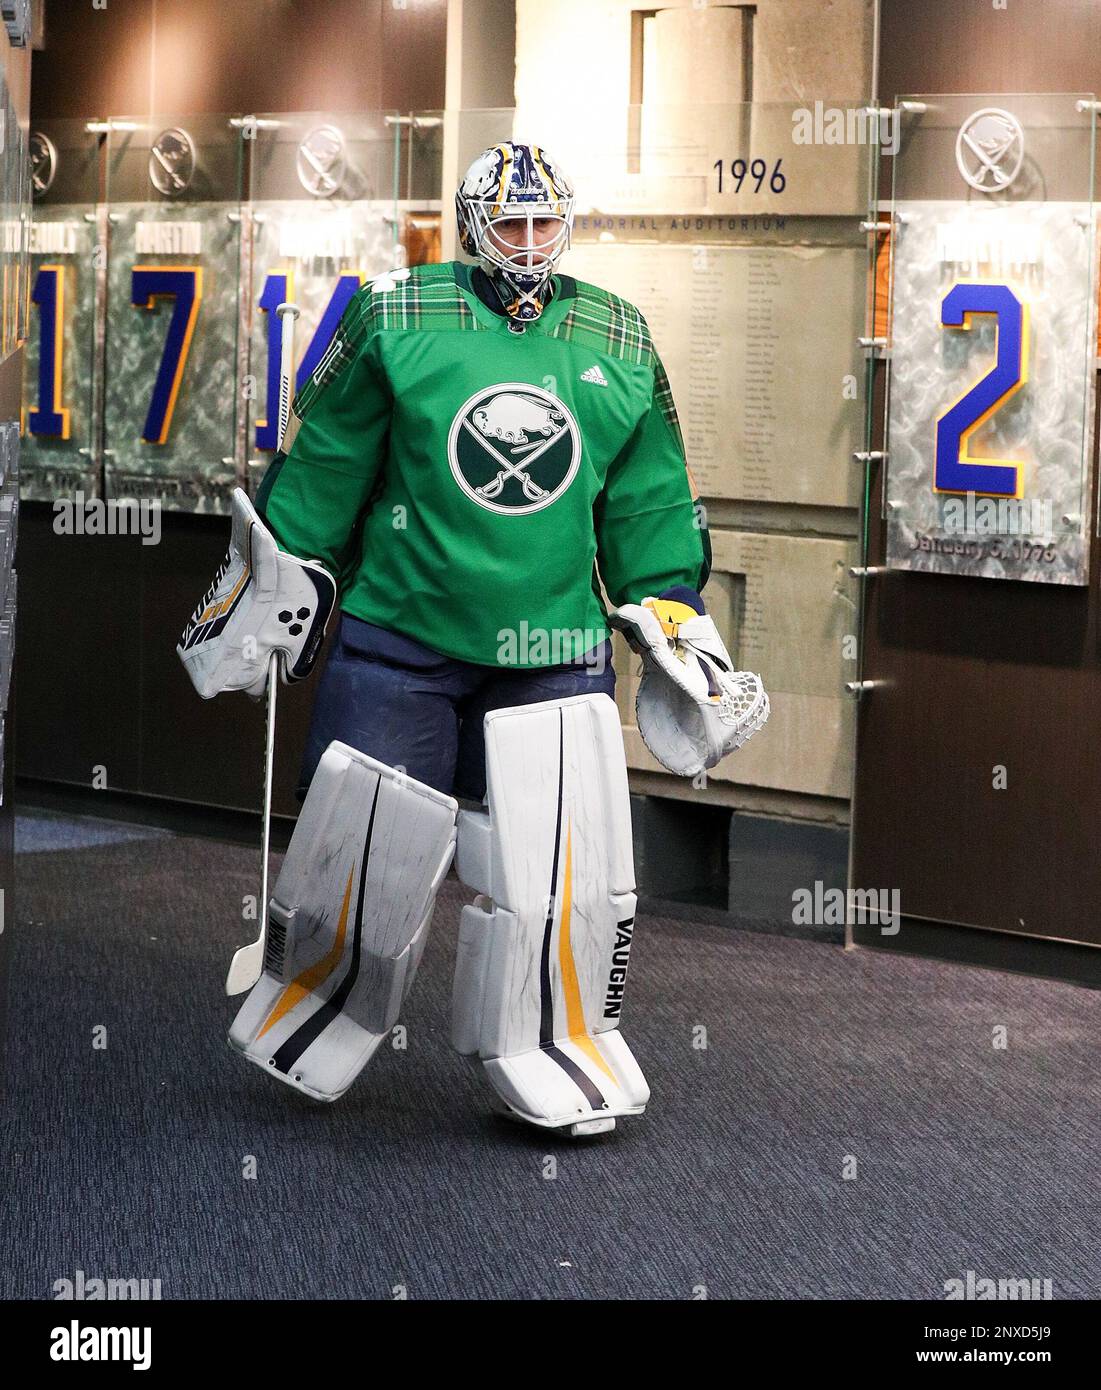 March 17, 2018: Buffalo Sabres goaltender Chad Johnson (31) makes his way  to the Sabres locker room in a special St. Patricks day jersey that will  auctioned off for charity following the